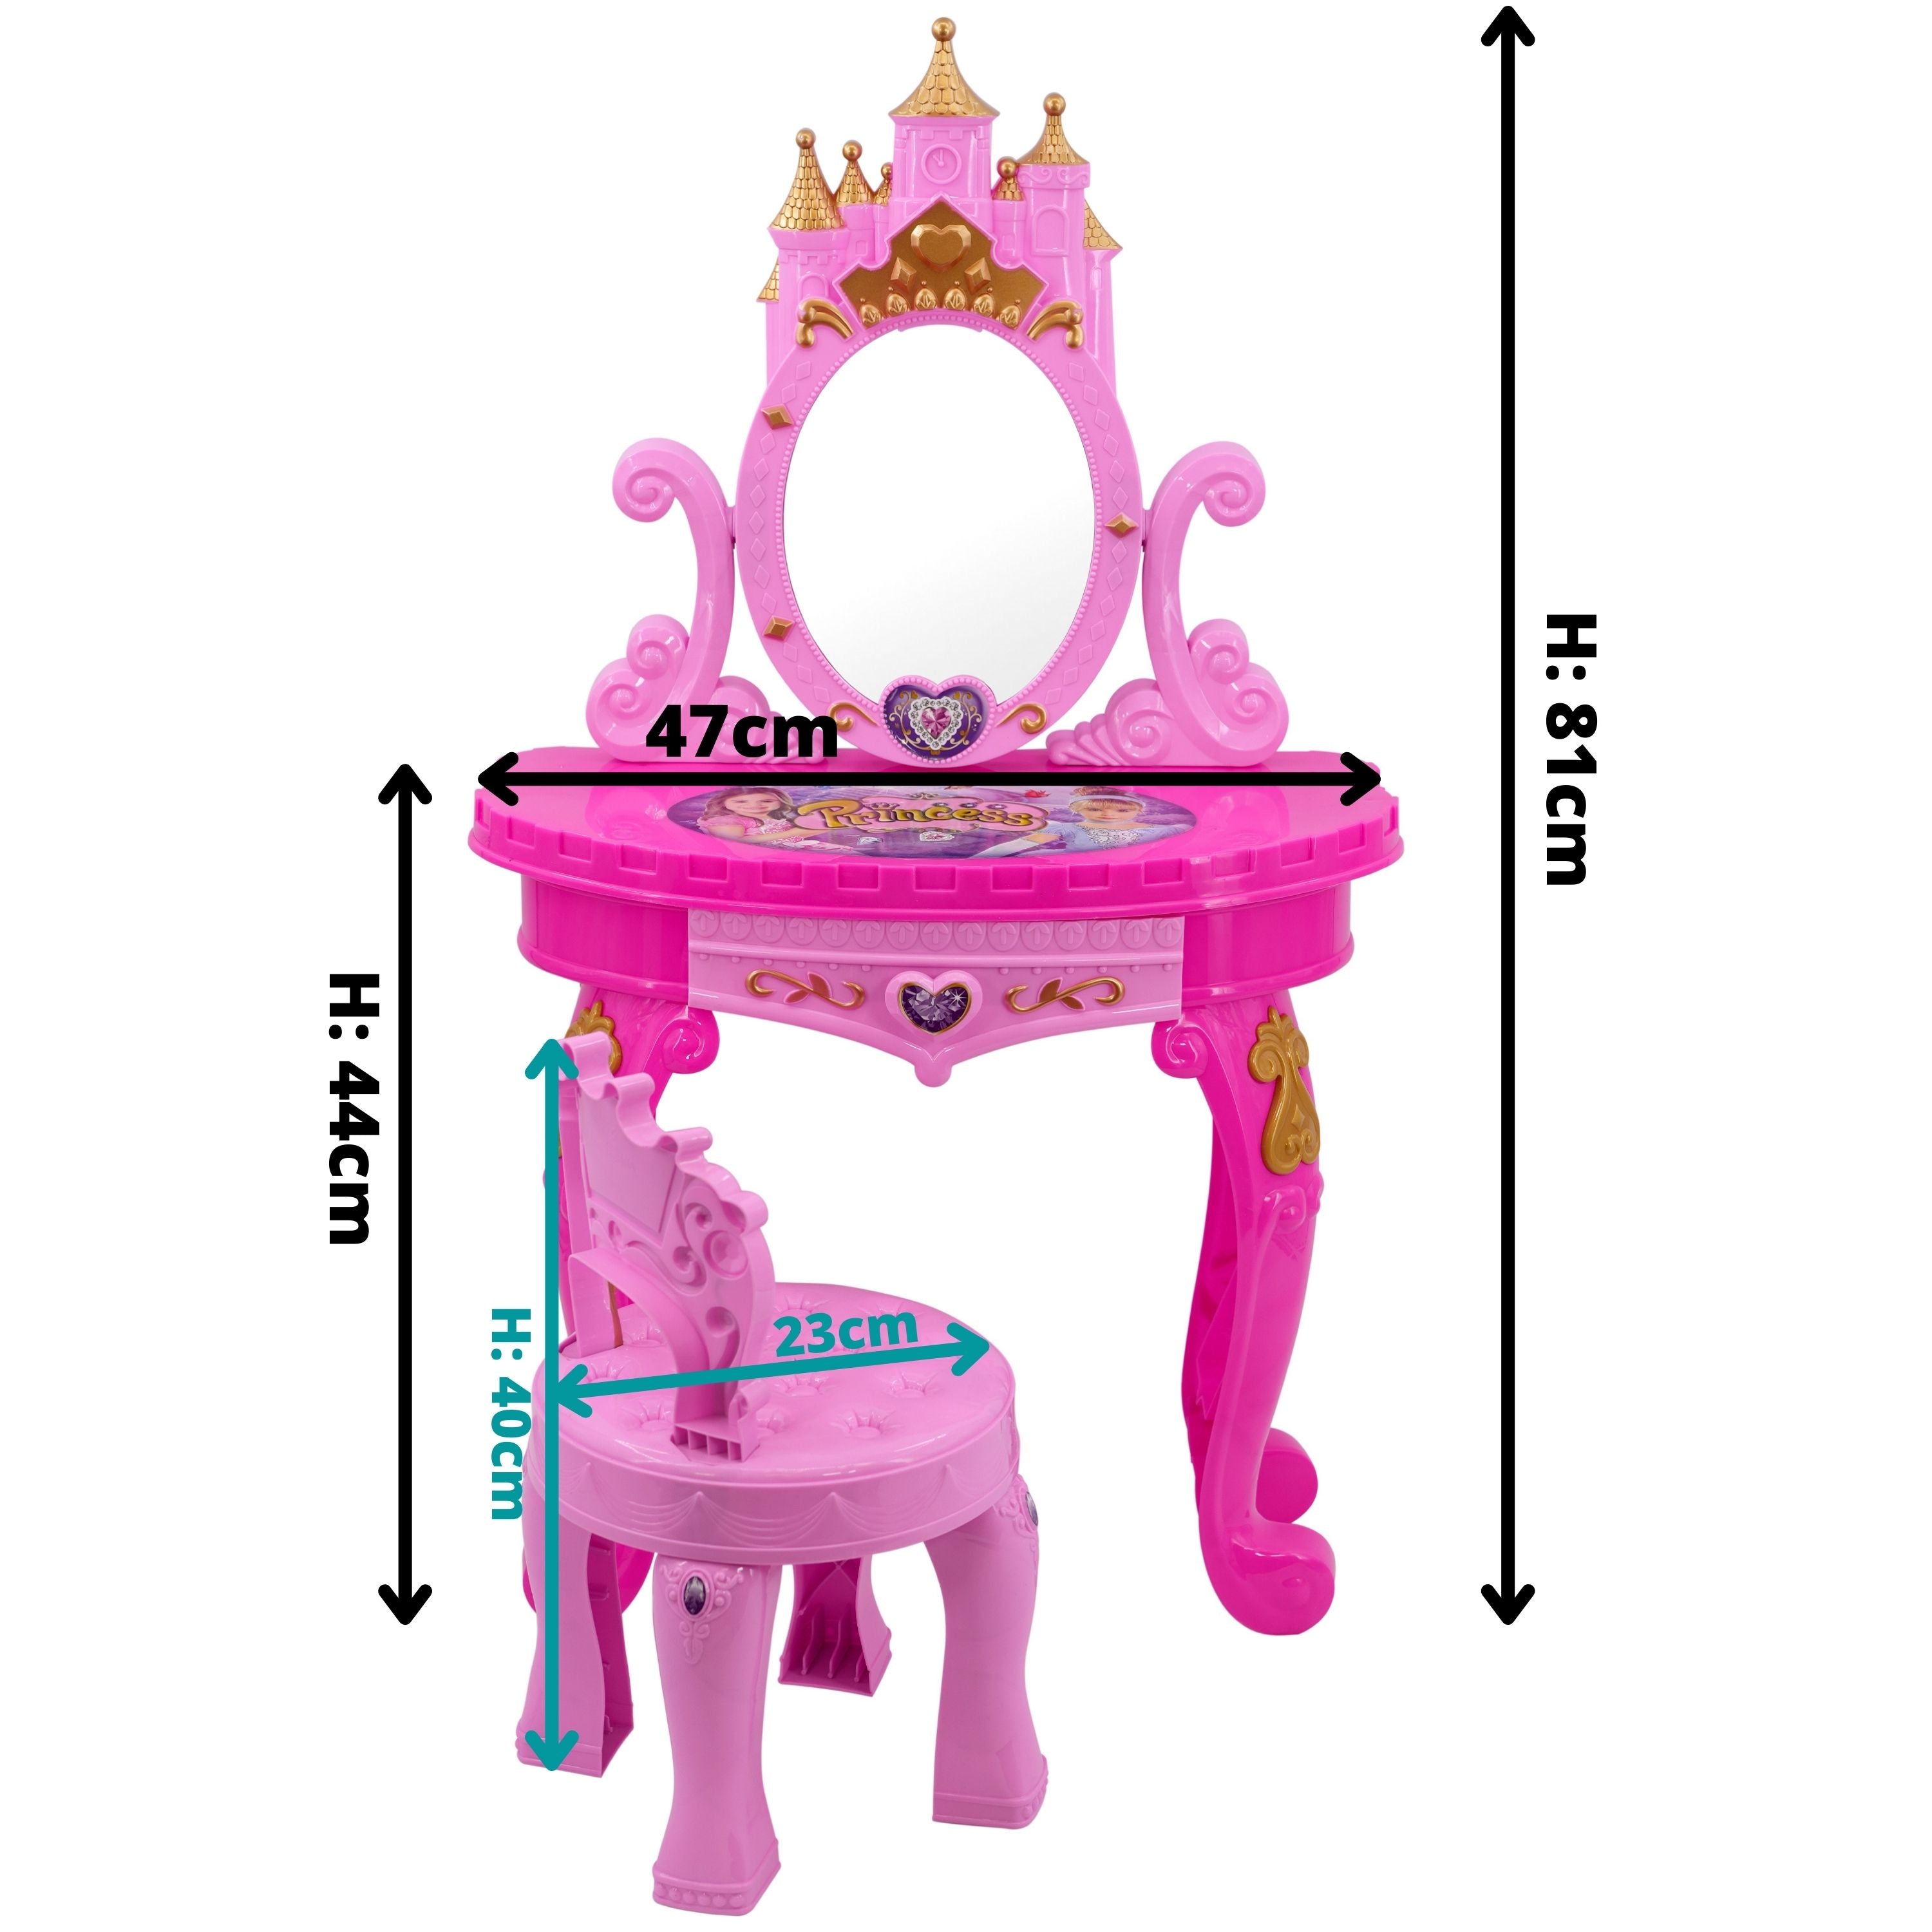 Princess Vanity Dressing Table & Stool Toy The Magic Toy Shop - The Magic Toy Shop